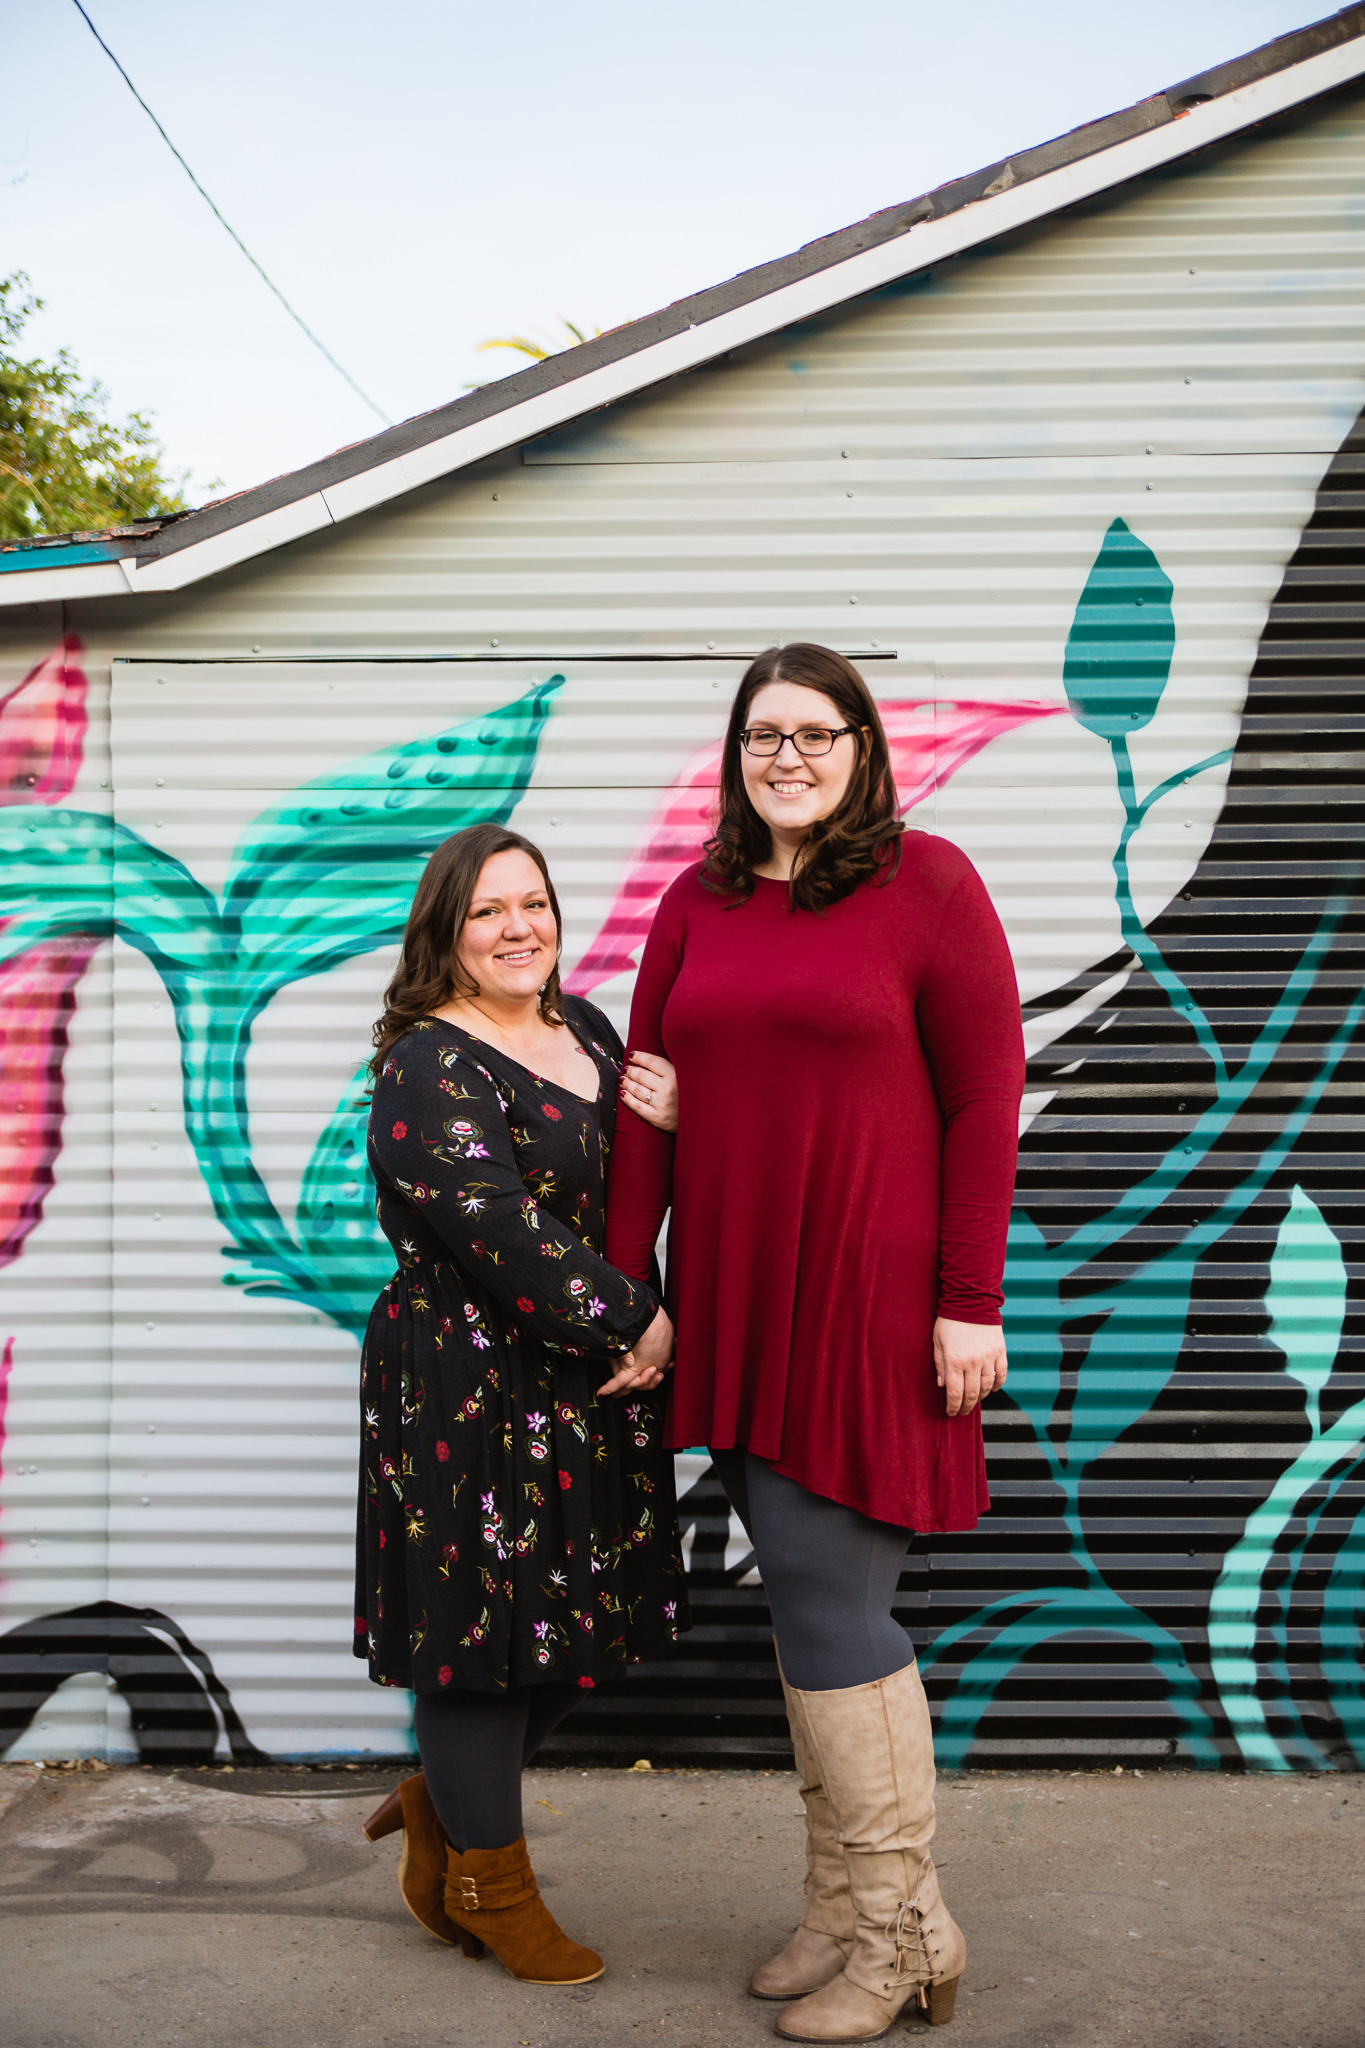 LGBT standing together in front of a mural for their engagement photography session in downtown Phoenix at Roosevelt Row.